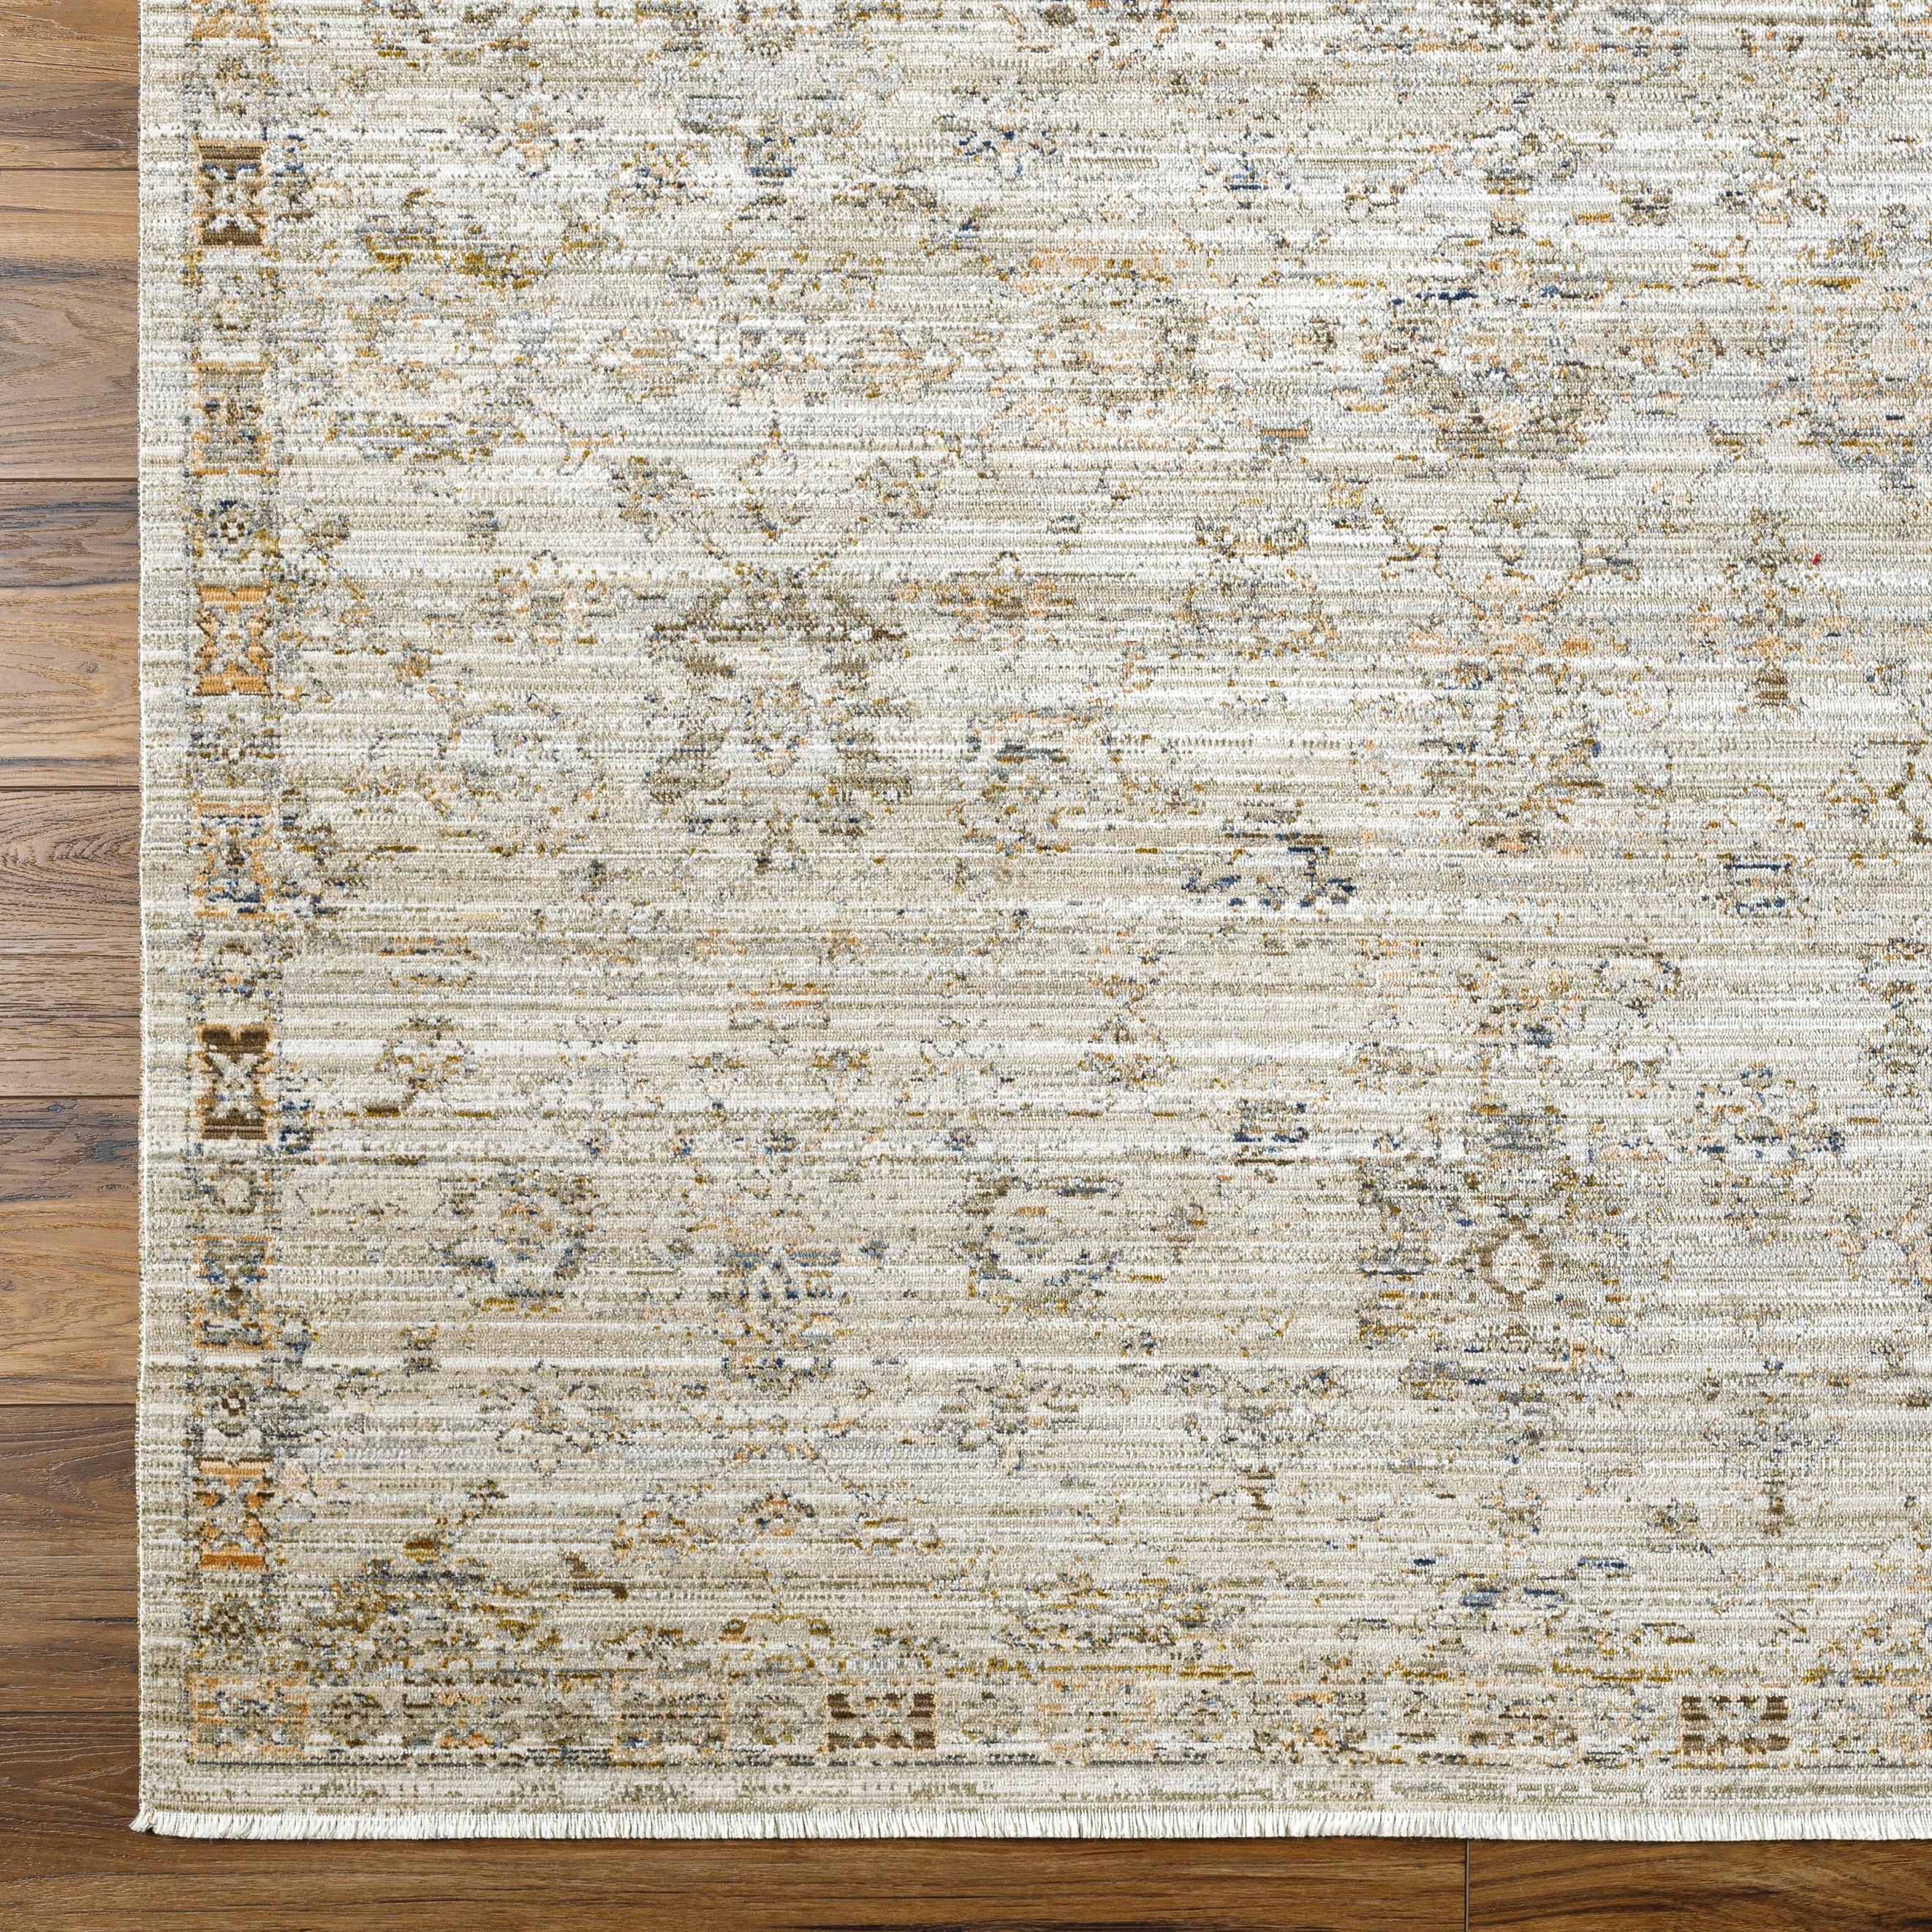 Introducing the Margaret area rug, the perfect piece to bring your space to life! This beautiful collaboration between Surya and Becki Owens features a vintage feel that is sure to be a statement piece in any room. Amethyst Home provides interior design, new home construction design consulting, vintage area rugs, and lighting in the Tampa metro area.